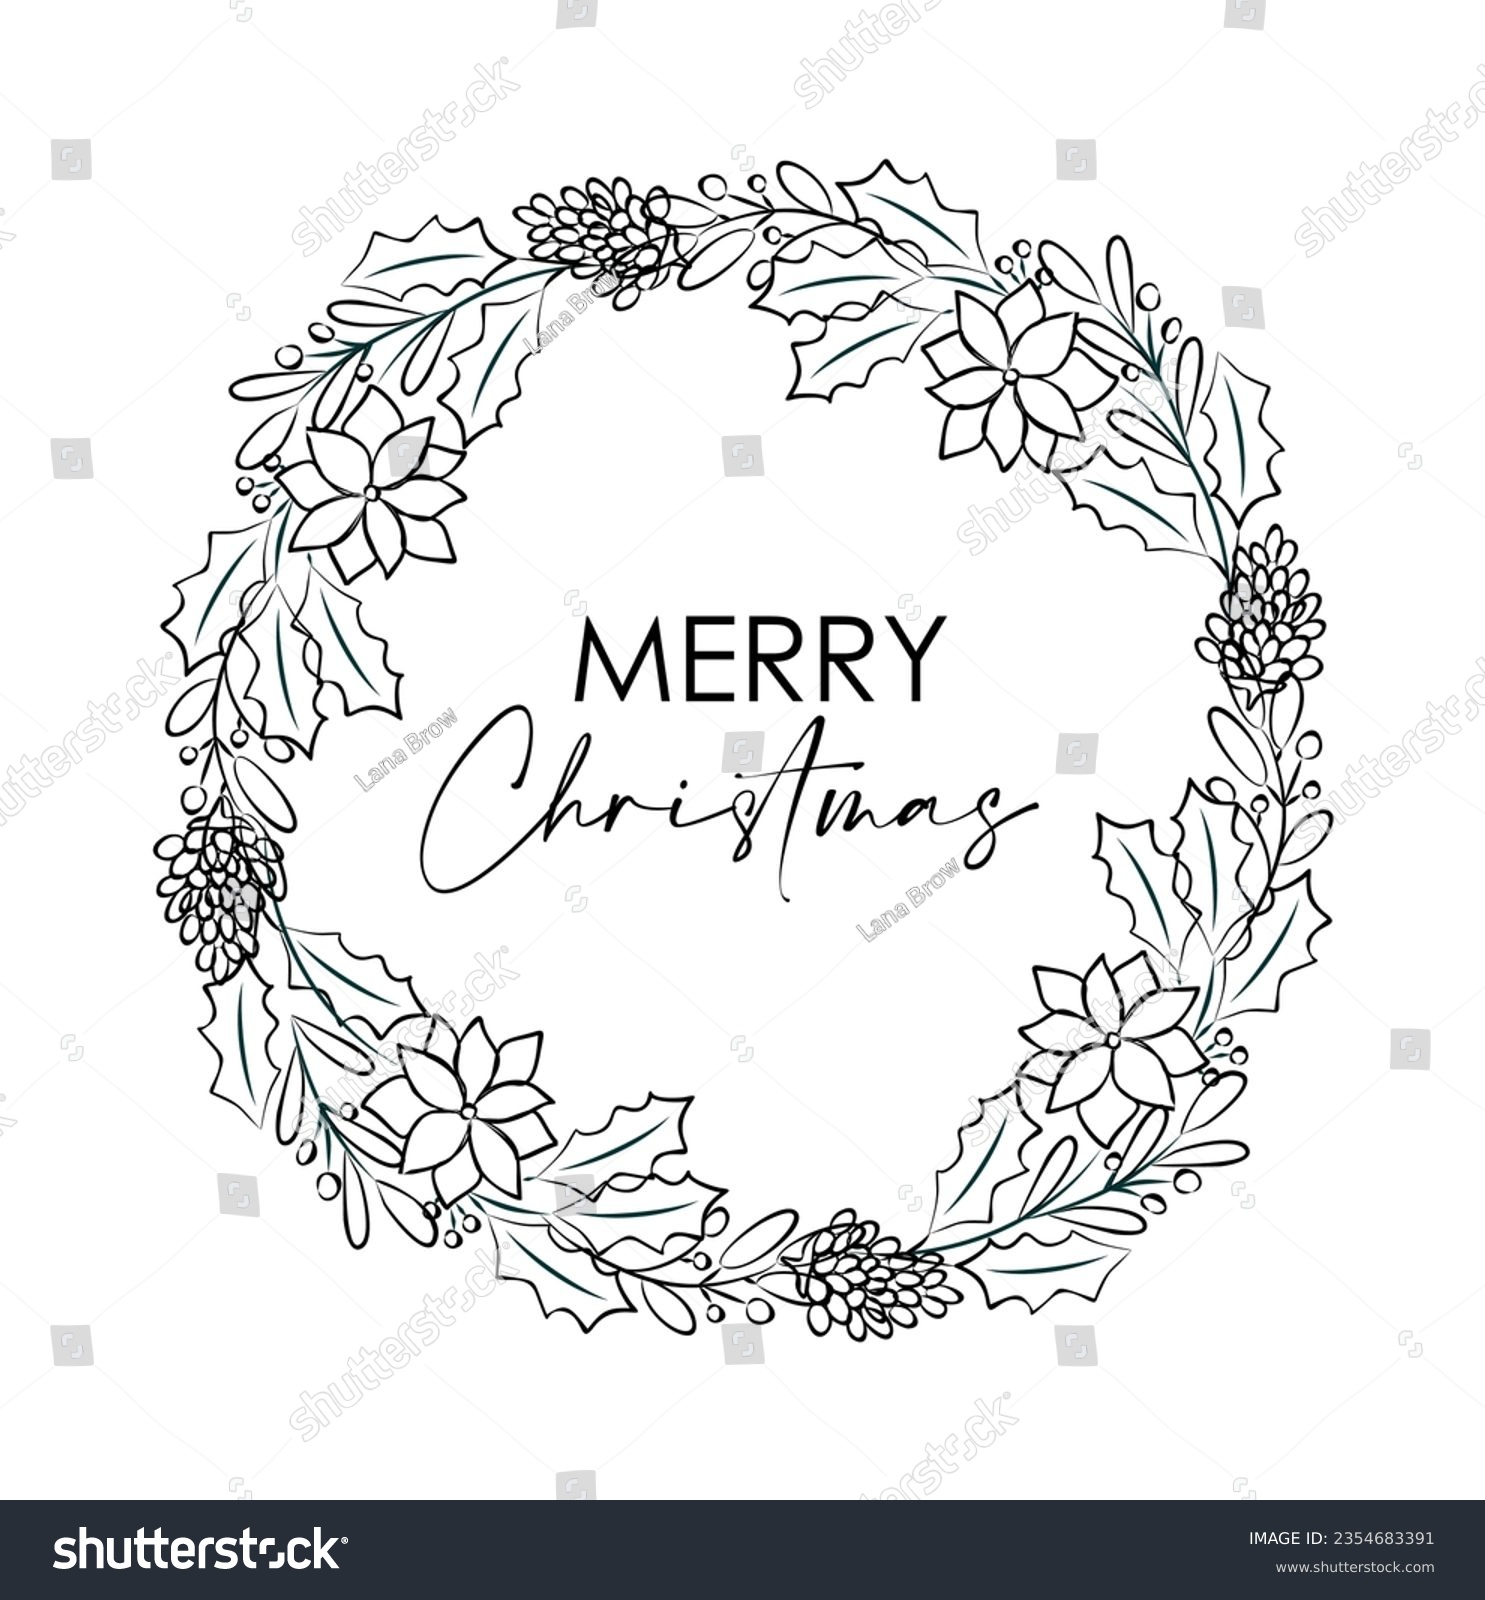 SVG of Christmas wreath with holly berries, mistletoe, pine, fir branches, cones, rowan berries, poinsettia flowers hand drawn black ink style sketch. Vector illustration isolated on white background svg